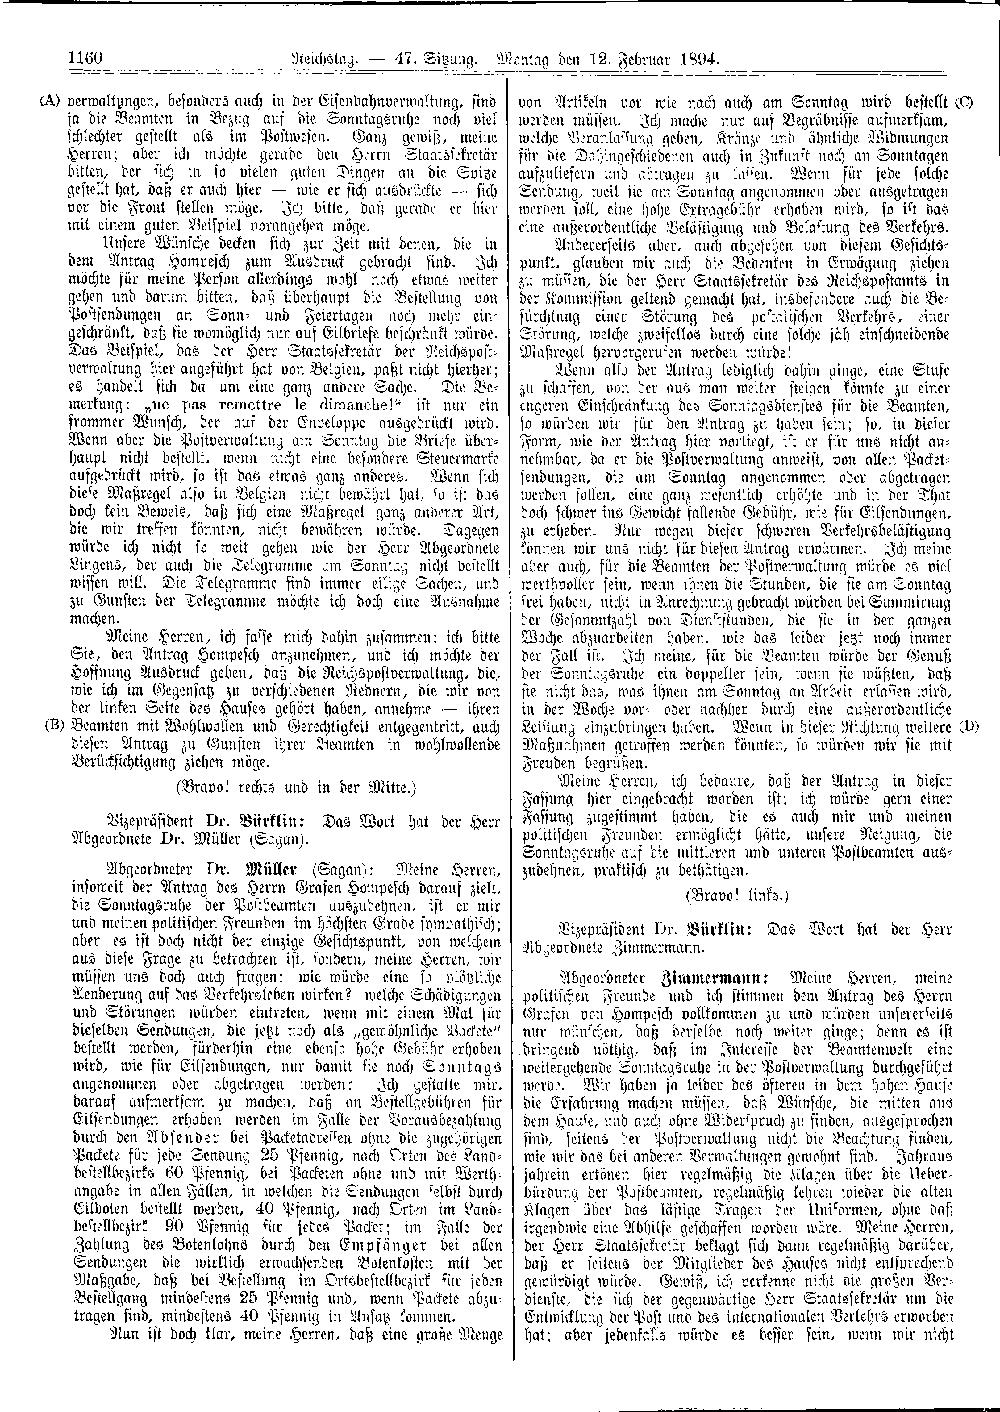 Scan of page 1160